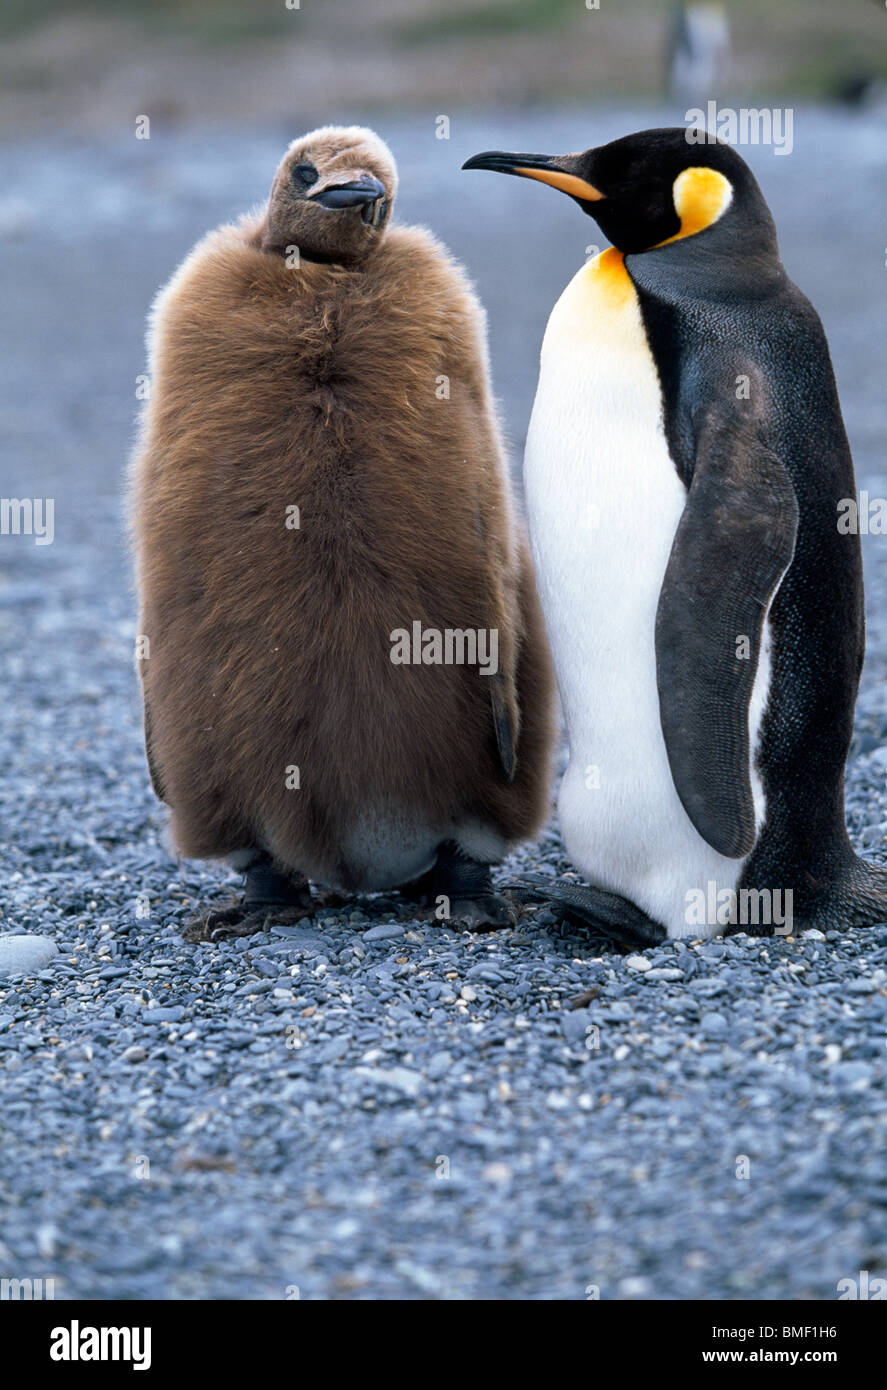 King penguin with chick, St Andrew's Bay, South Georgia Stock Photo